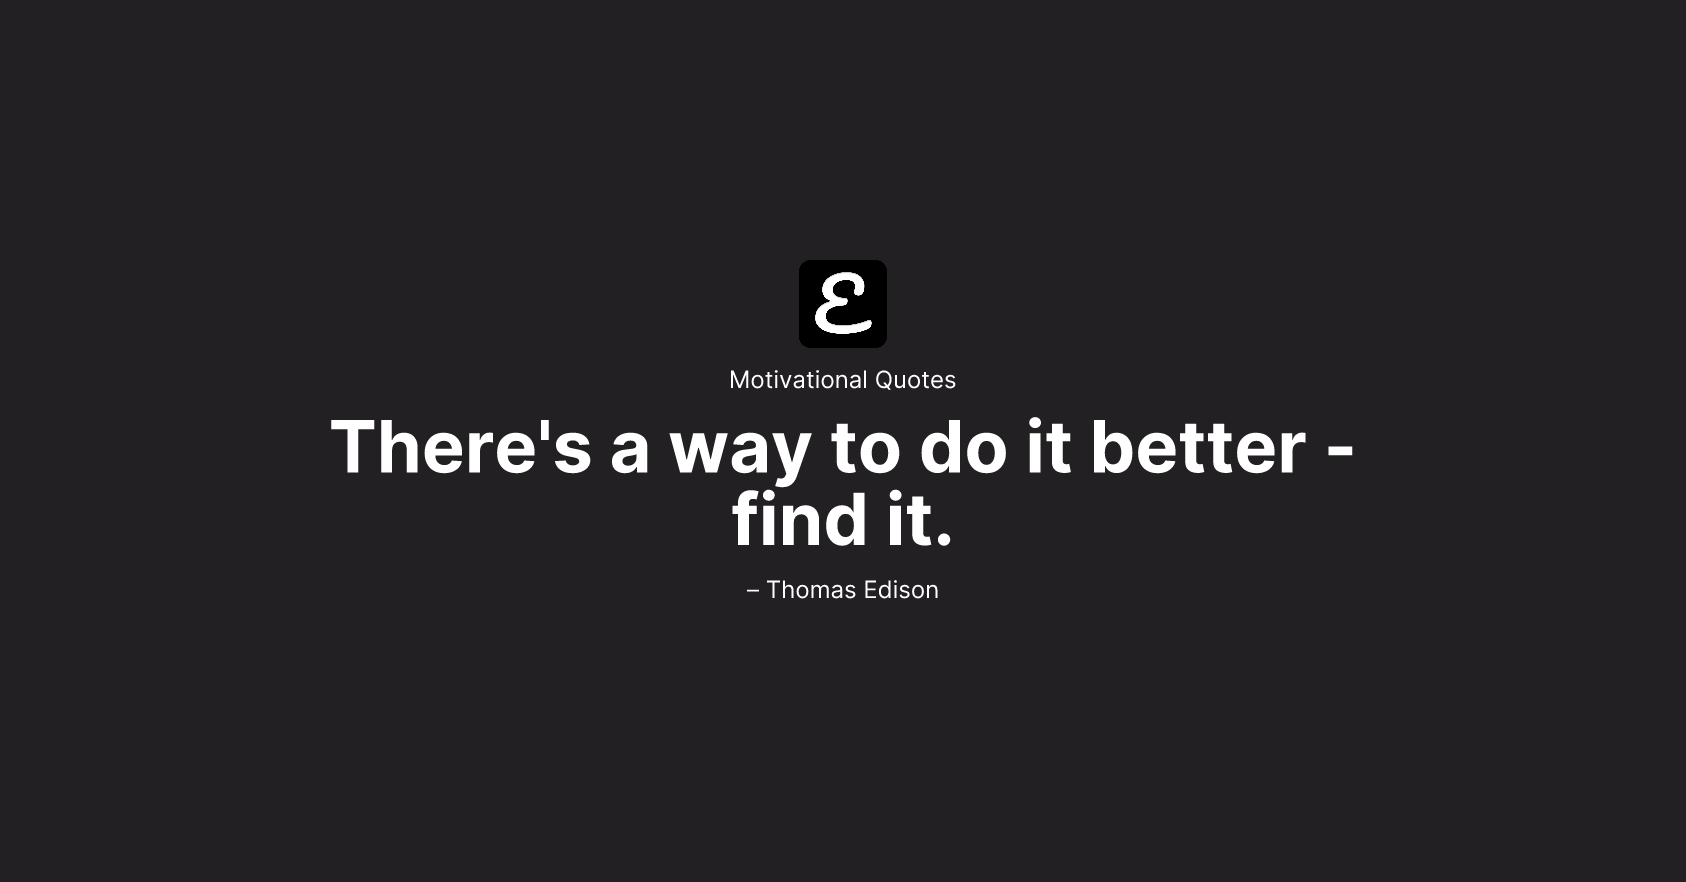 Thomas Edison - There's a way to do it better - find it.